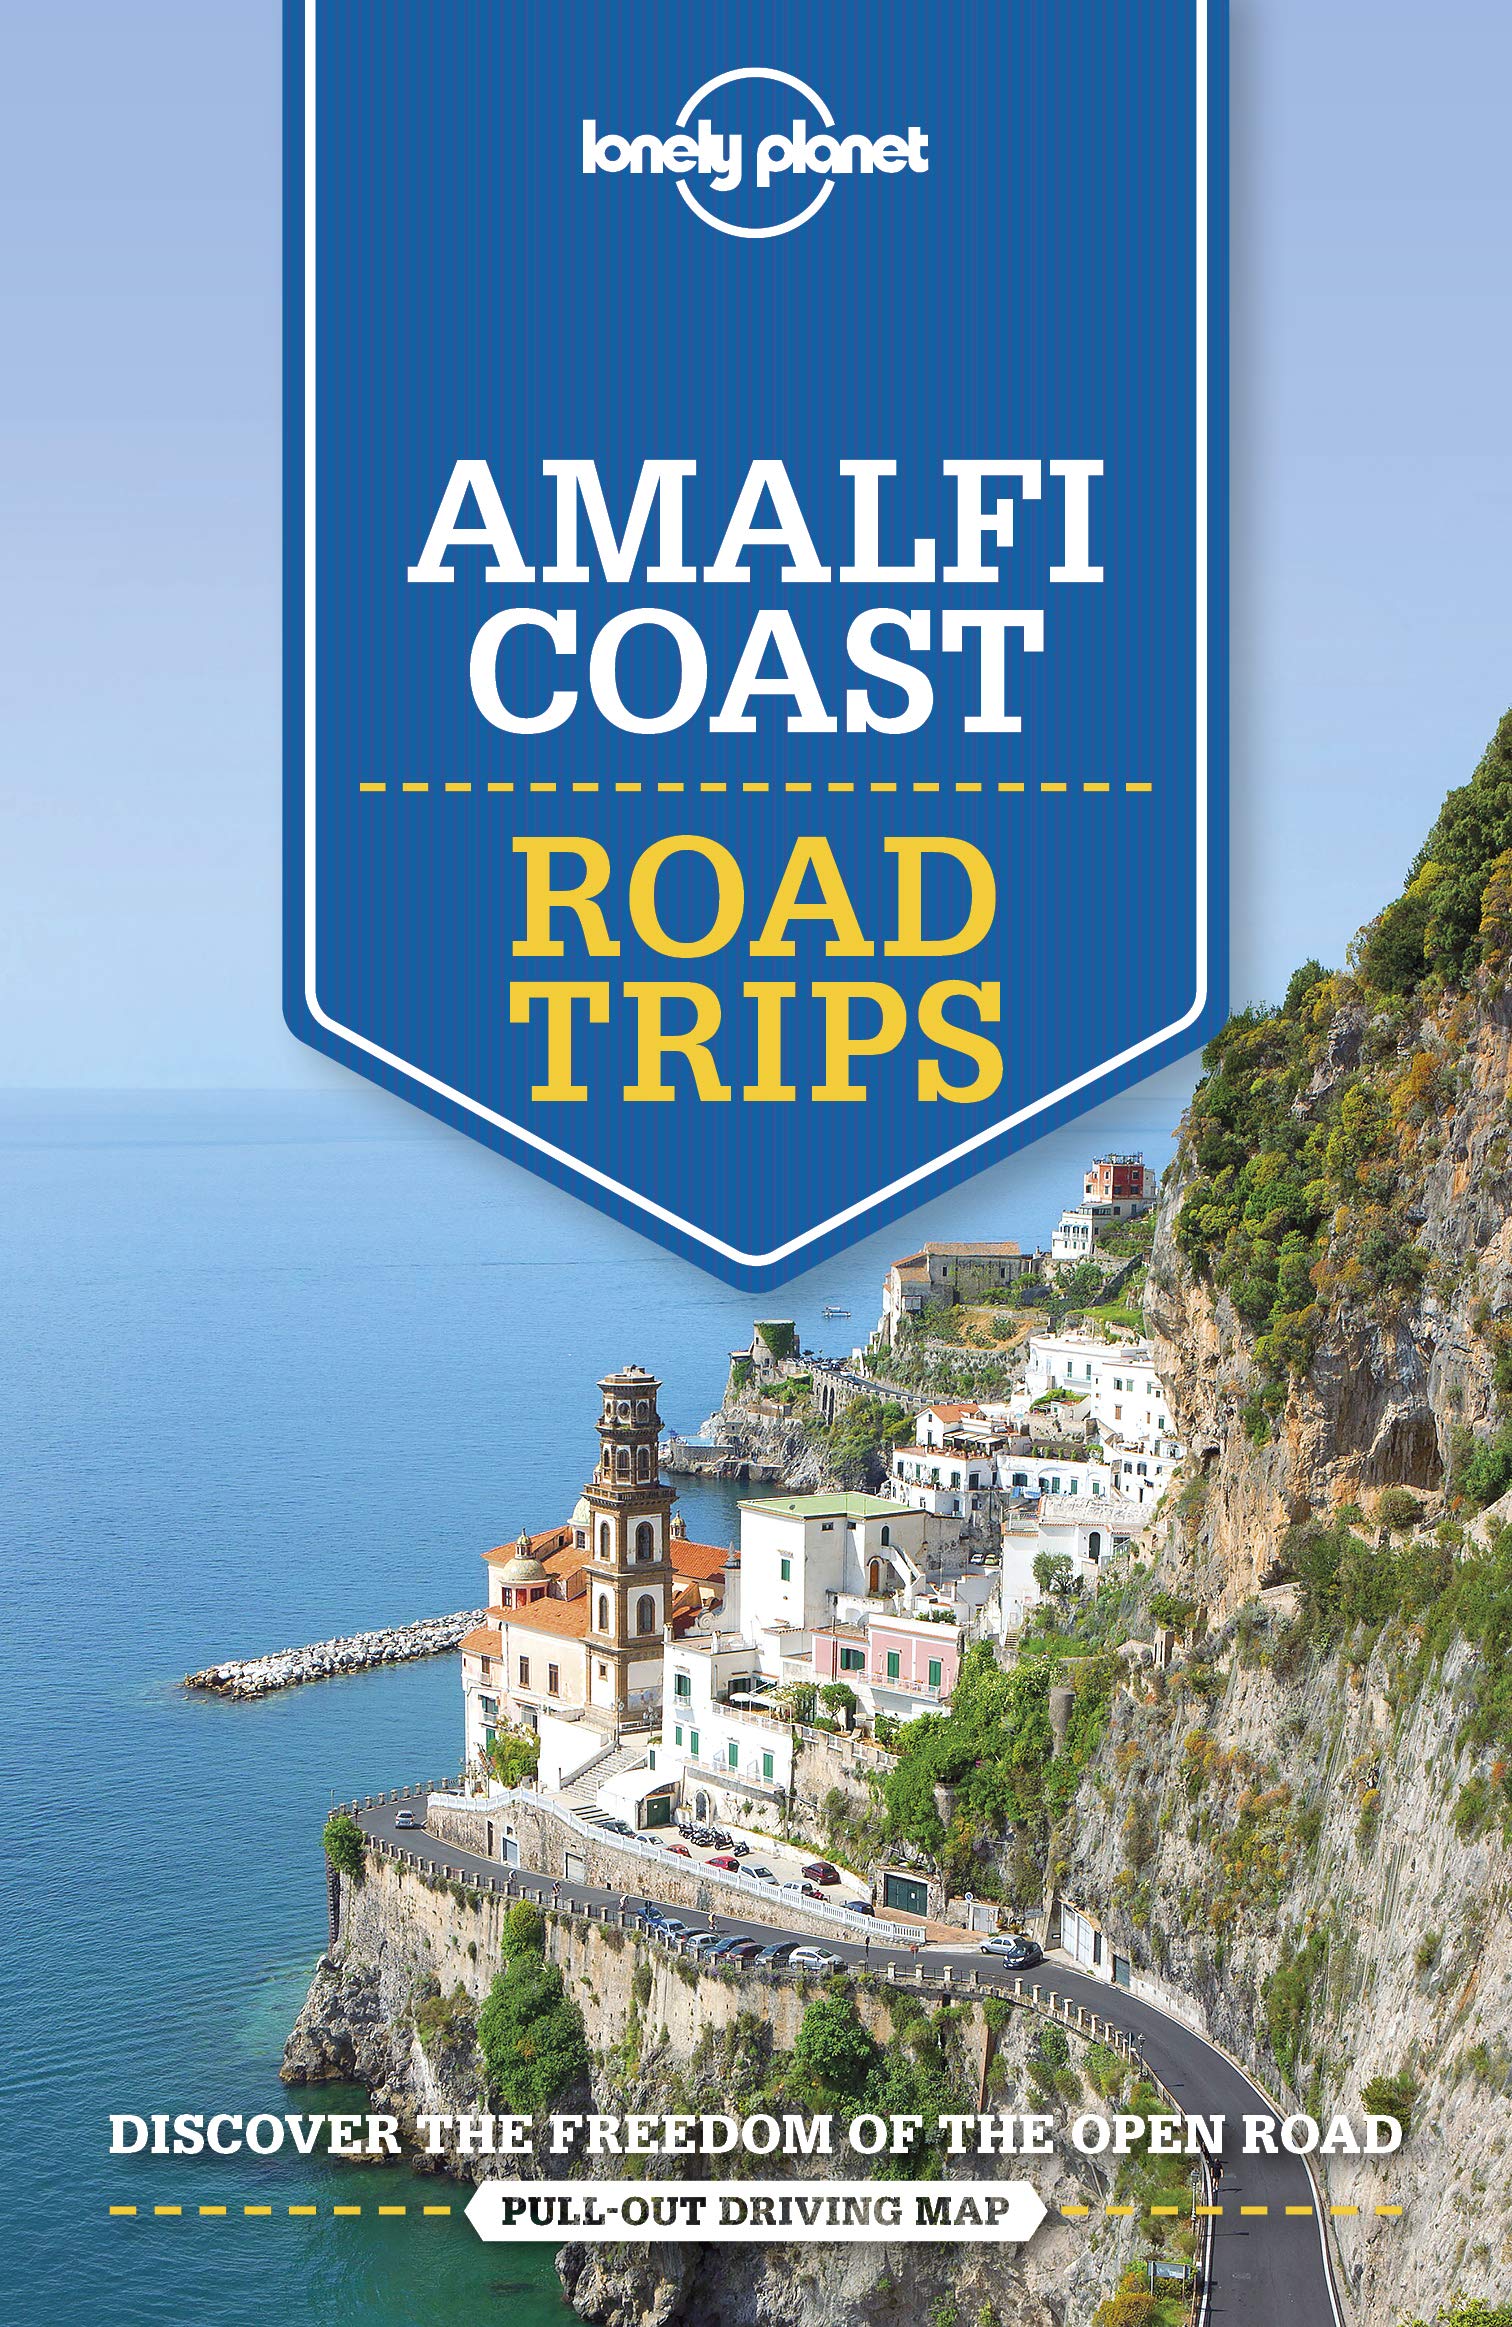 Amalfi Coast Lonely Planet Road Trips 9781786575685  Lonely Planet Road Trips  Reisgidsen Napels, Amalfi, Cilento, Campanië